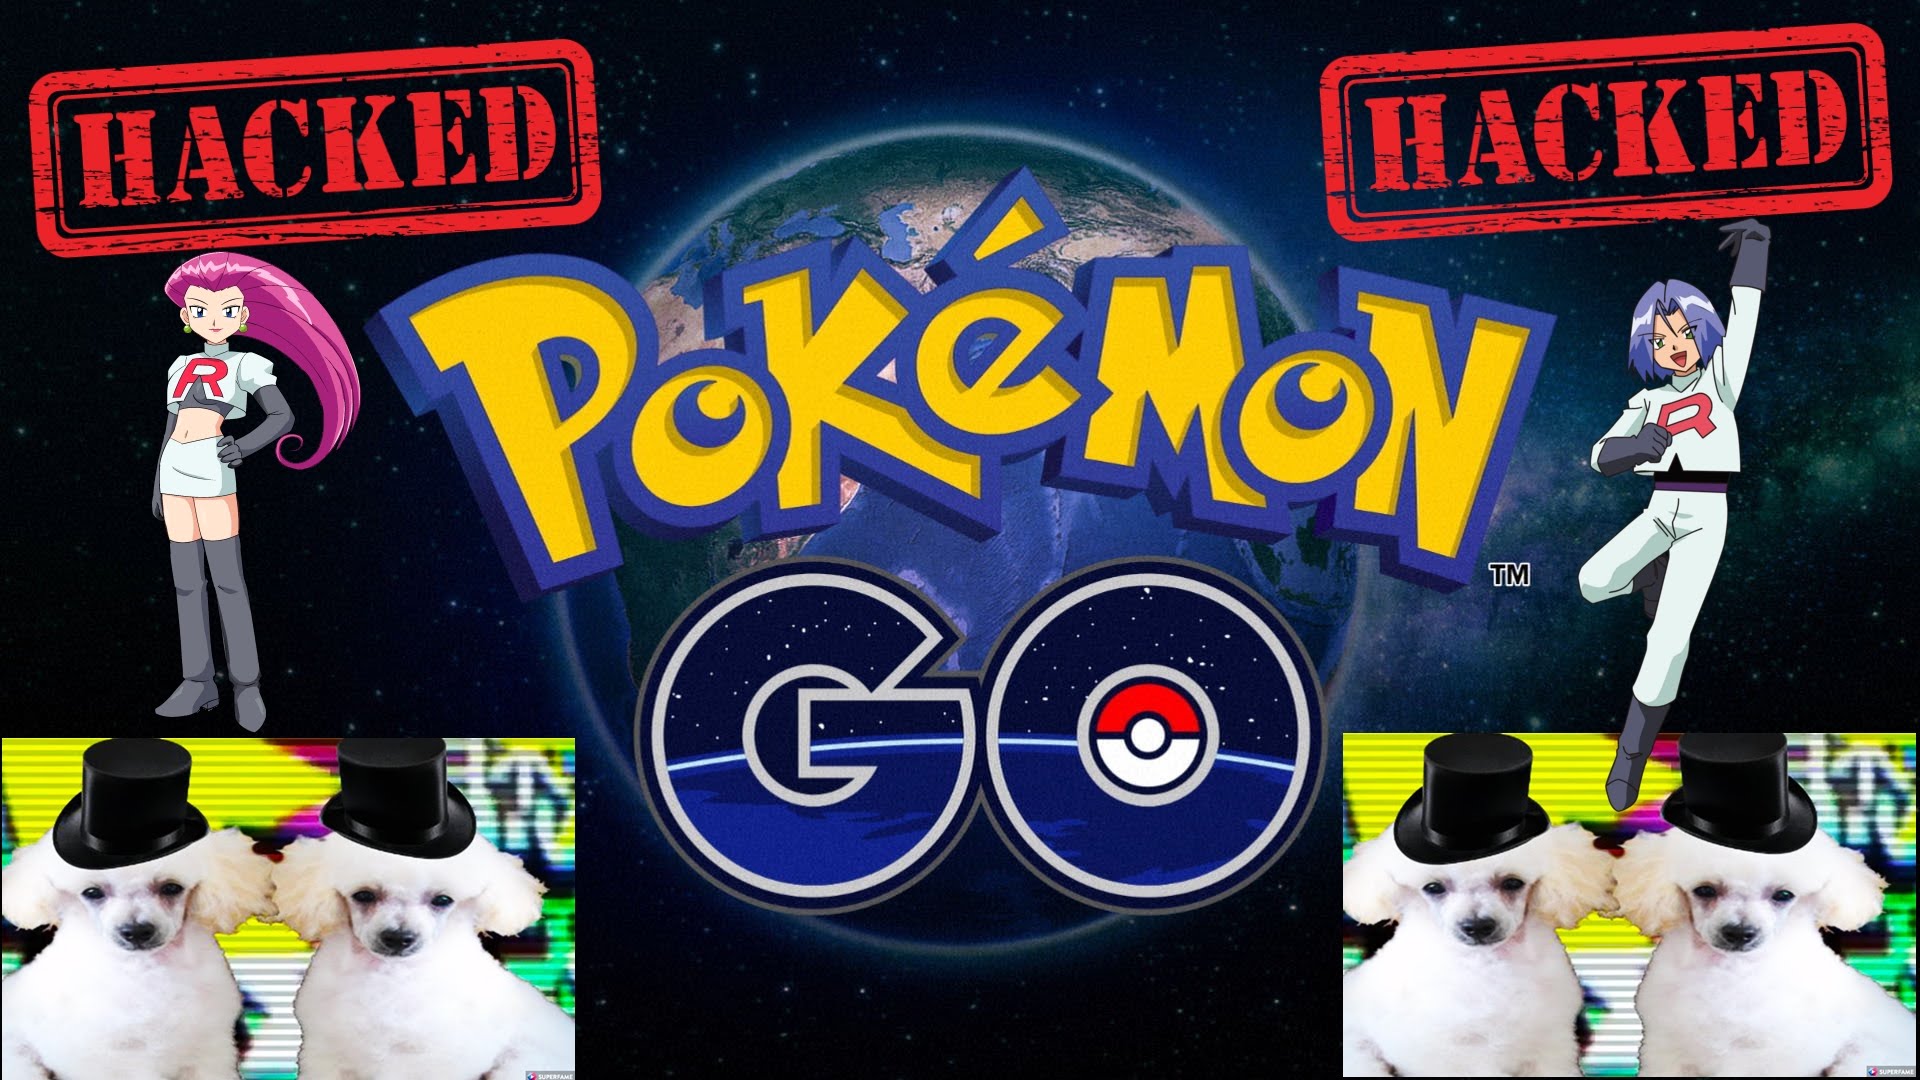 Pokemon Go Server Hacked By OurMine Hacking Group